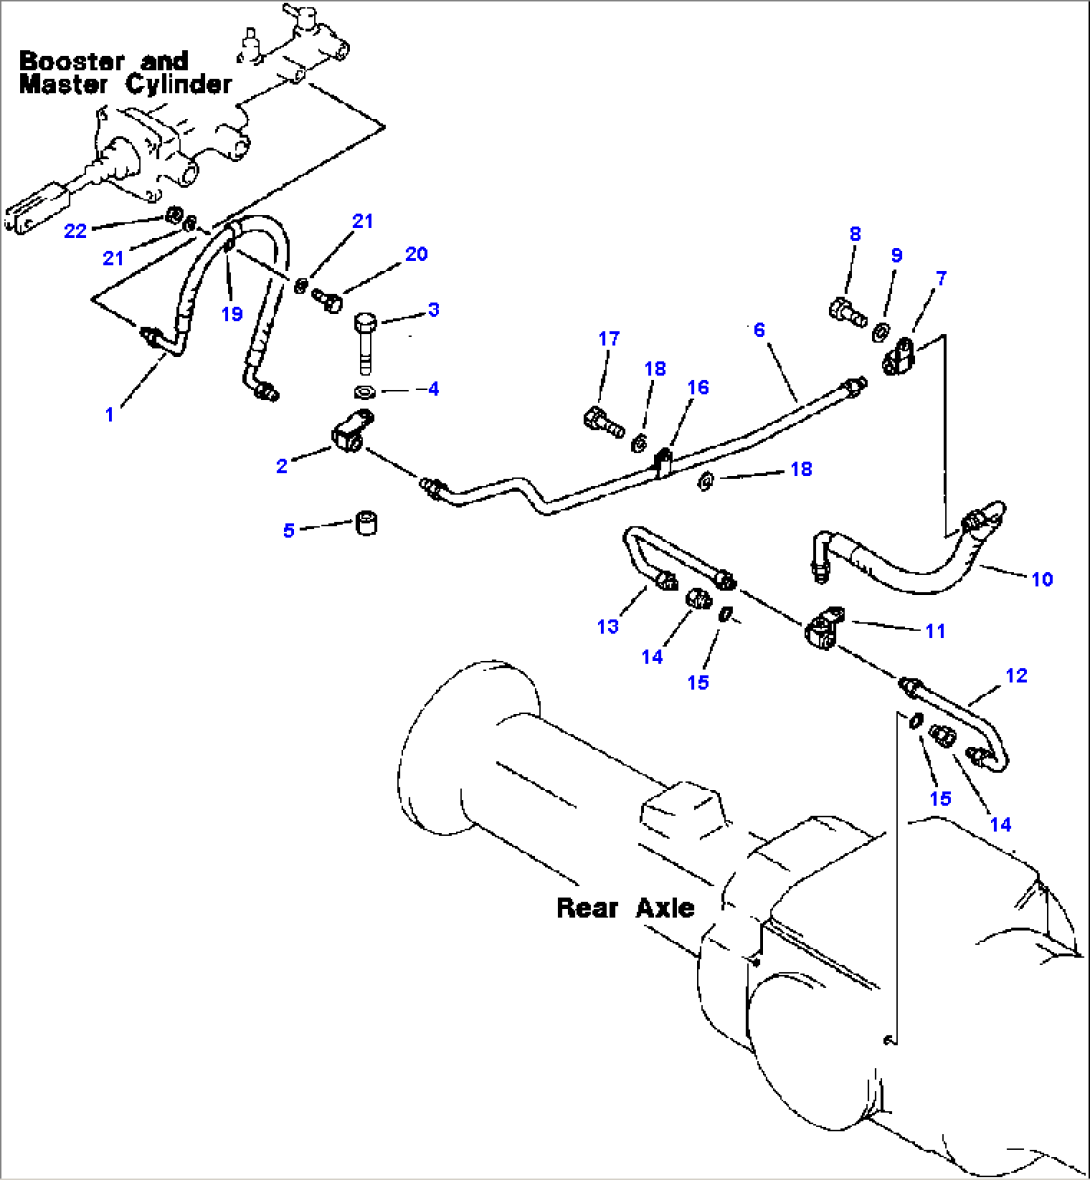 BRAKE OIL PIPING MASTER CYLINDER TO REAR AXLE